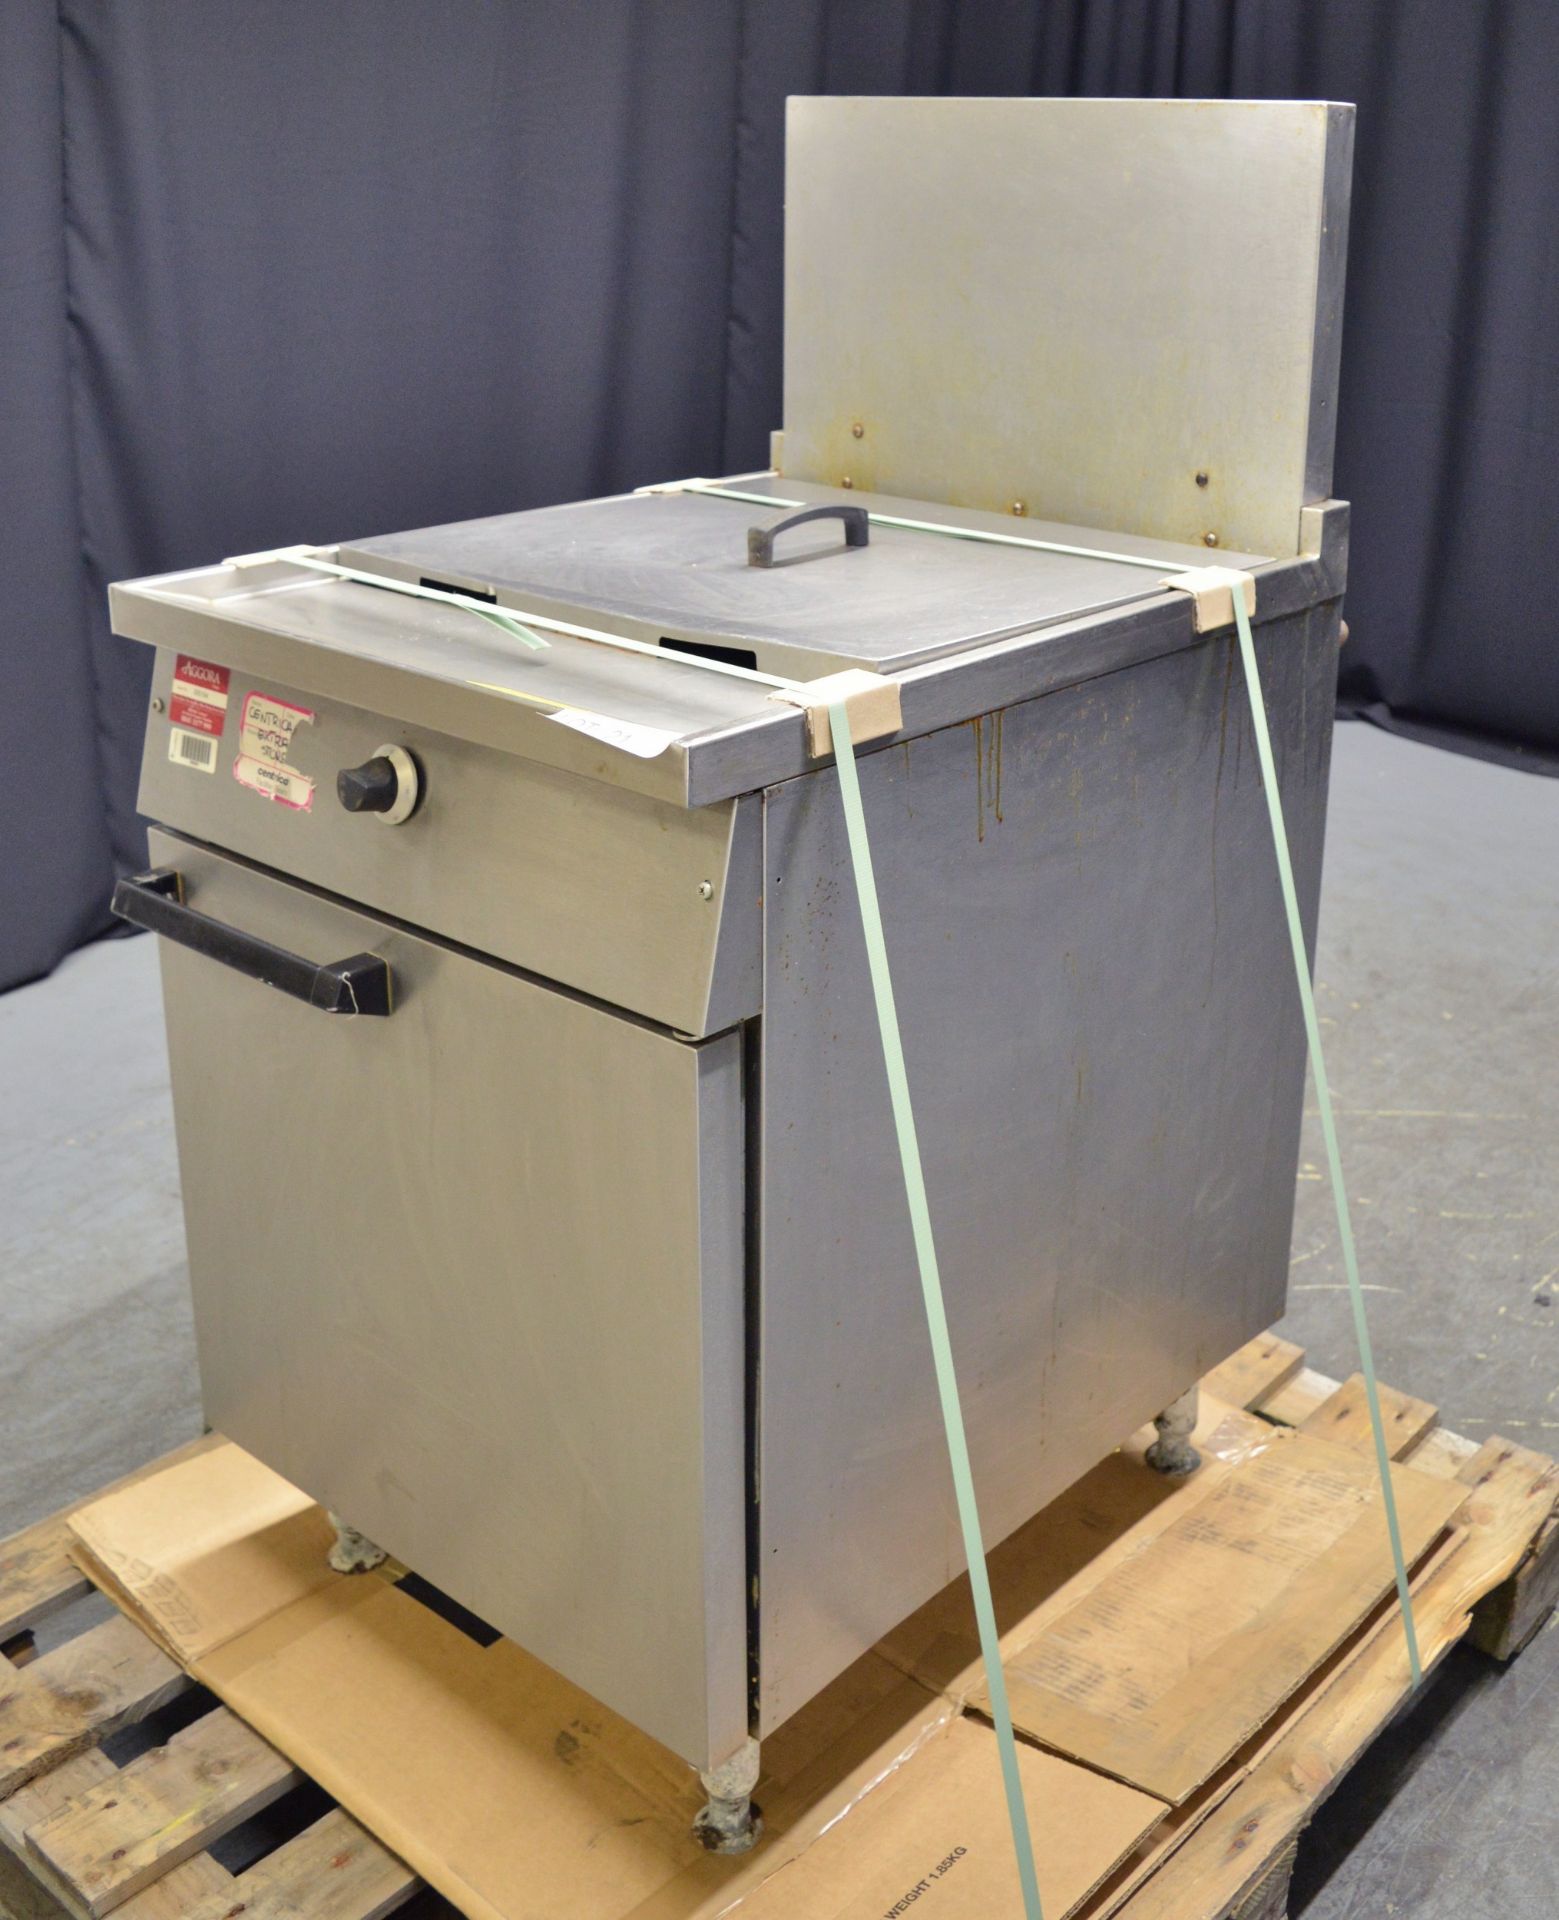 Falcon Double Gas Fryer 600mm - No Baskets - Image 3 of 9